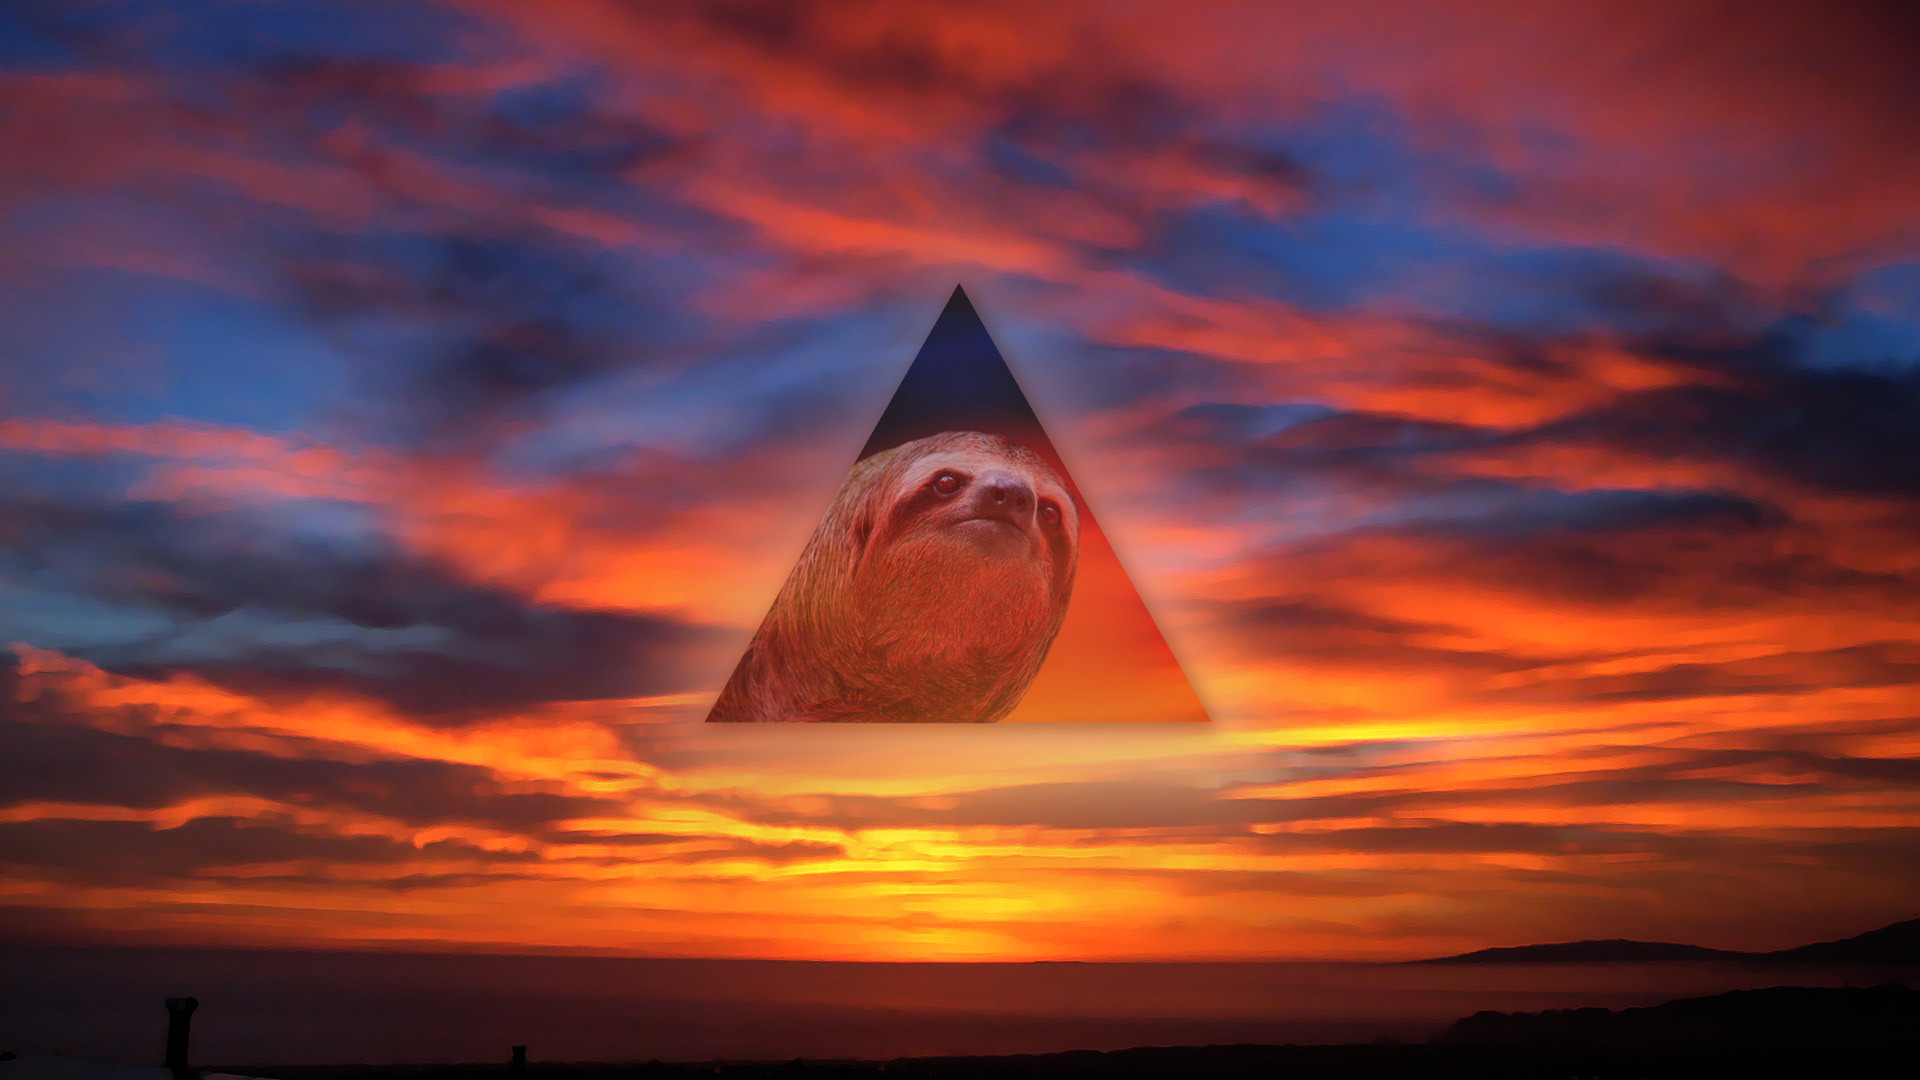 sloth, Triangle, Sunset Wallpaper